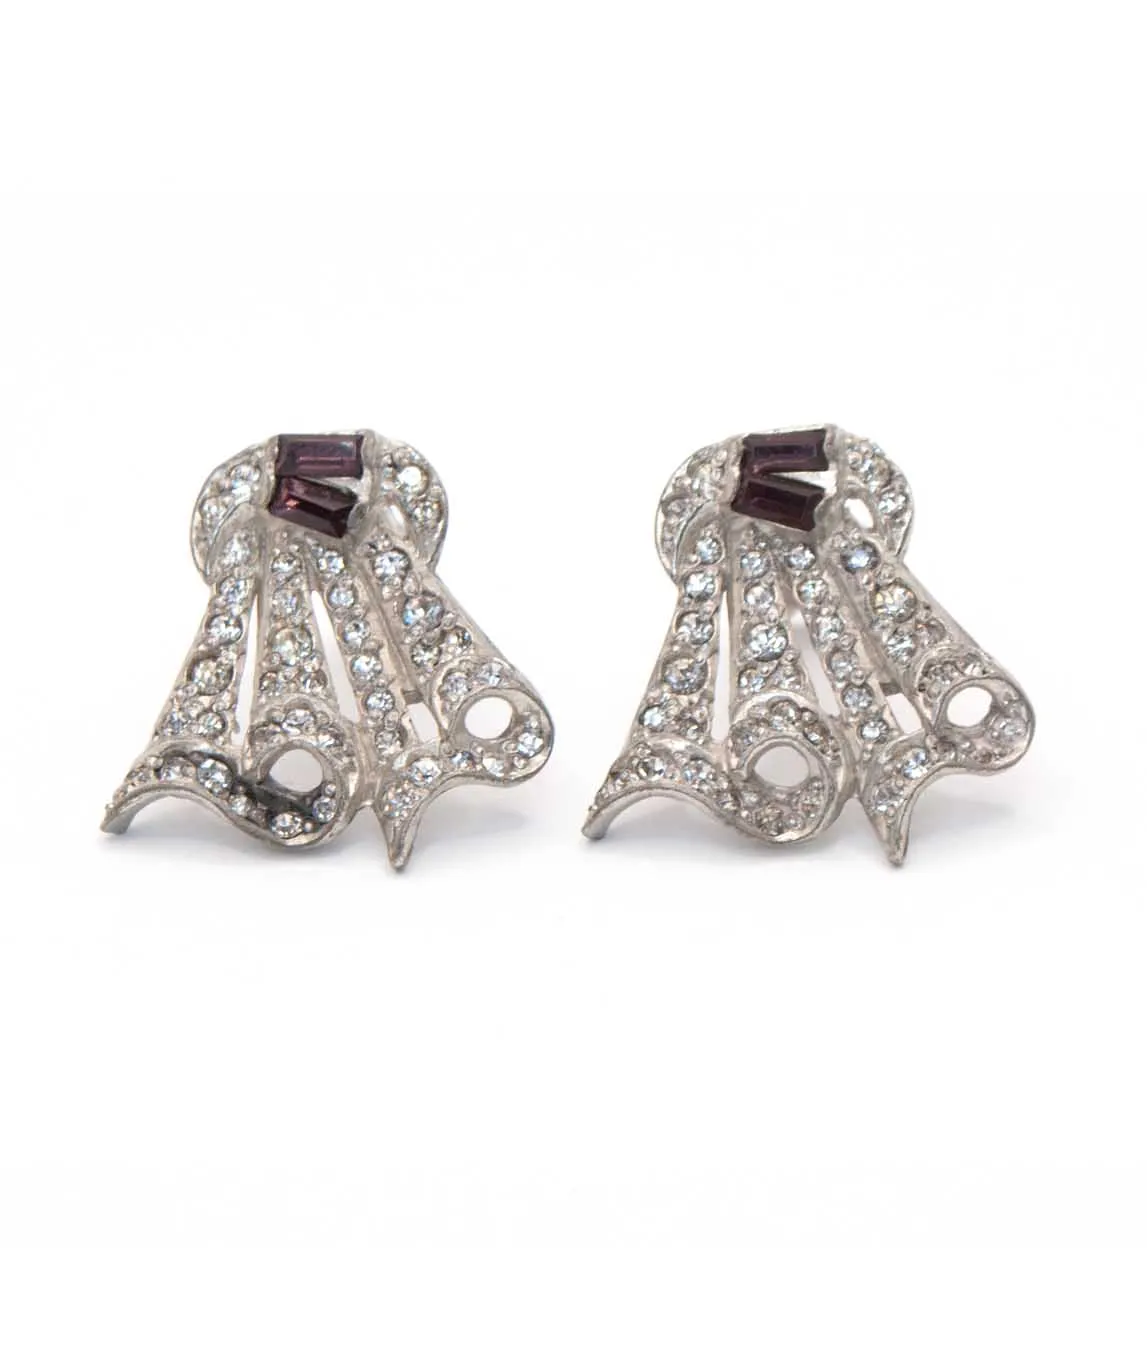 Two Art Deco dress clips clear crystals and purple baguette stones